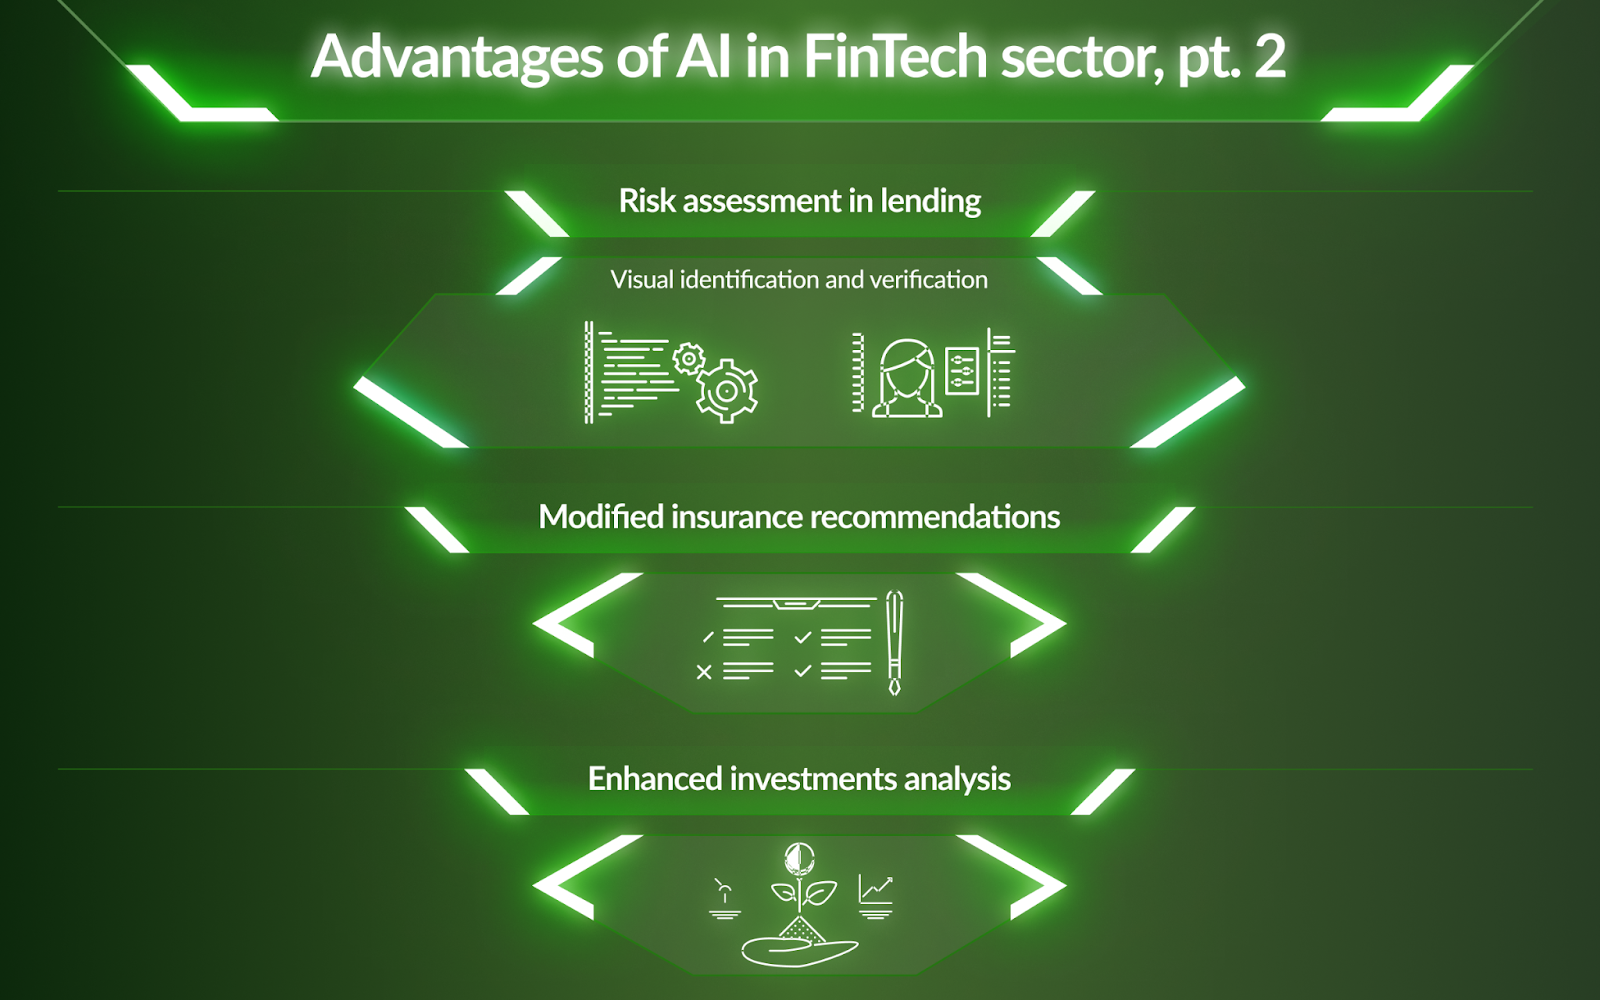 Advantages of ai in the FinTech sector, pt.2